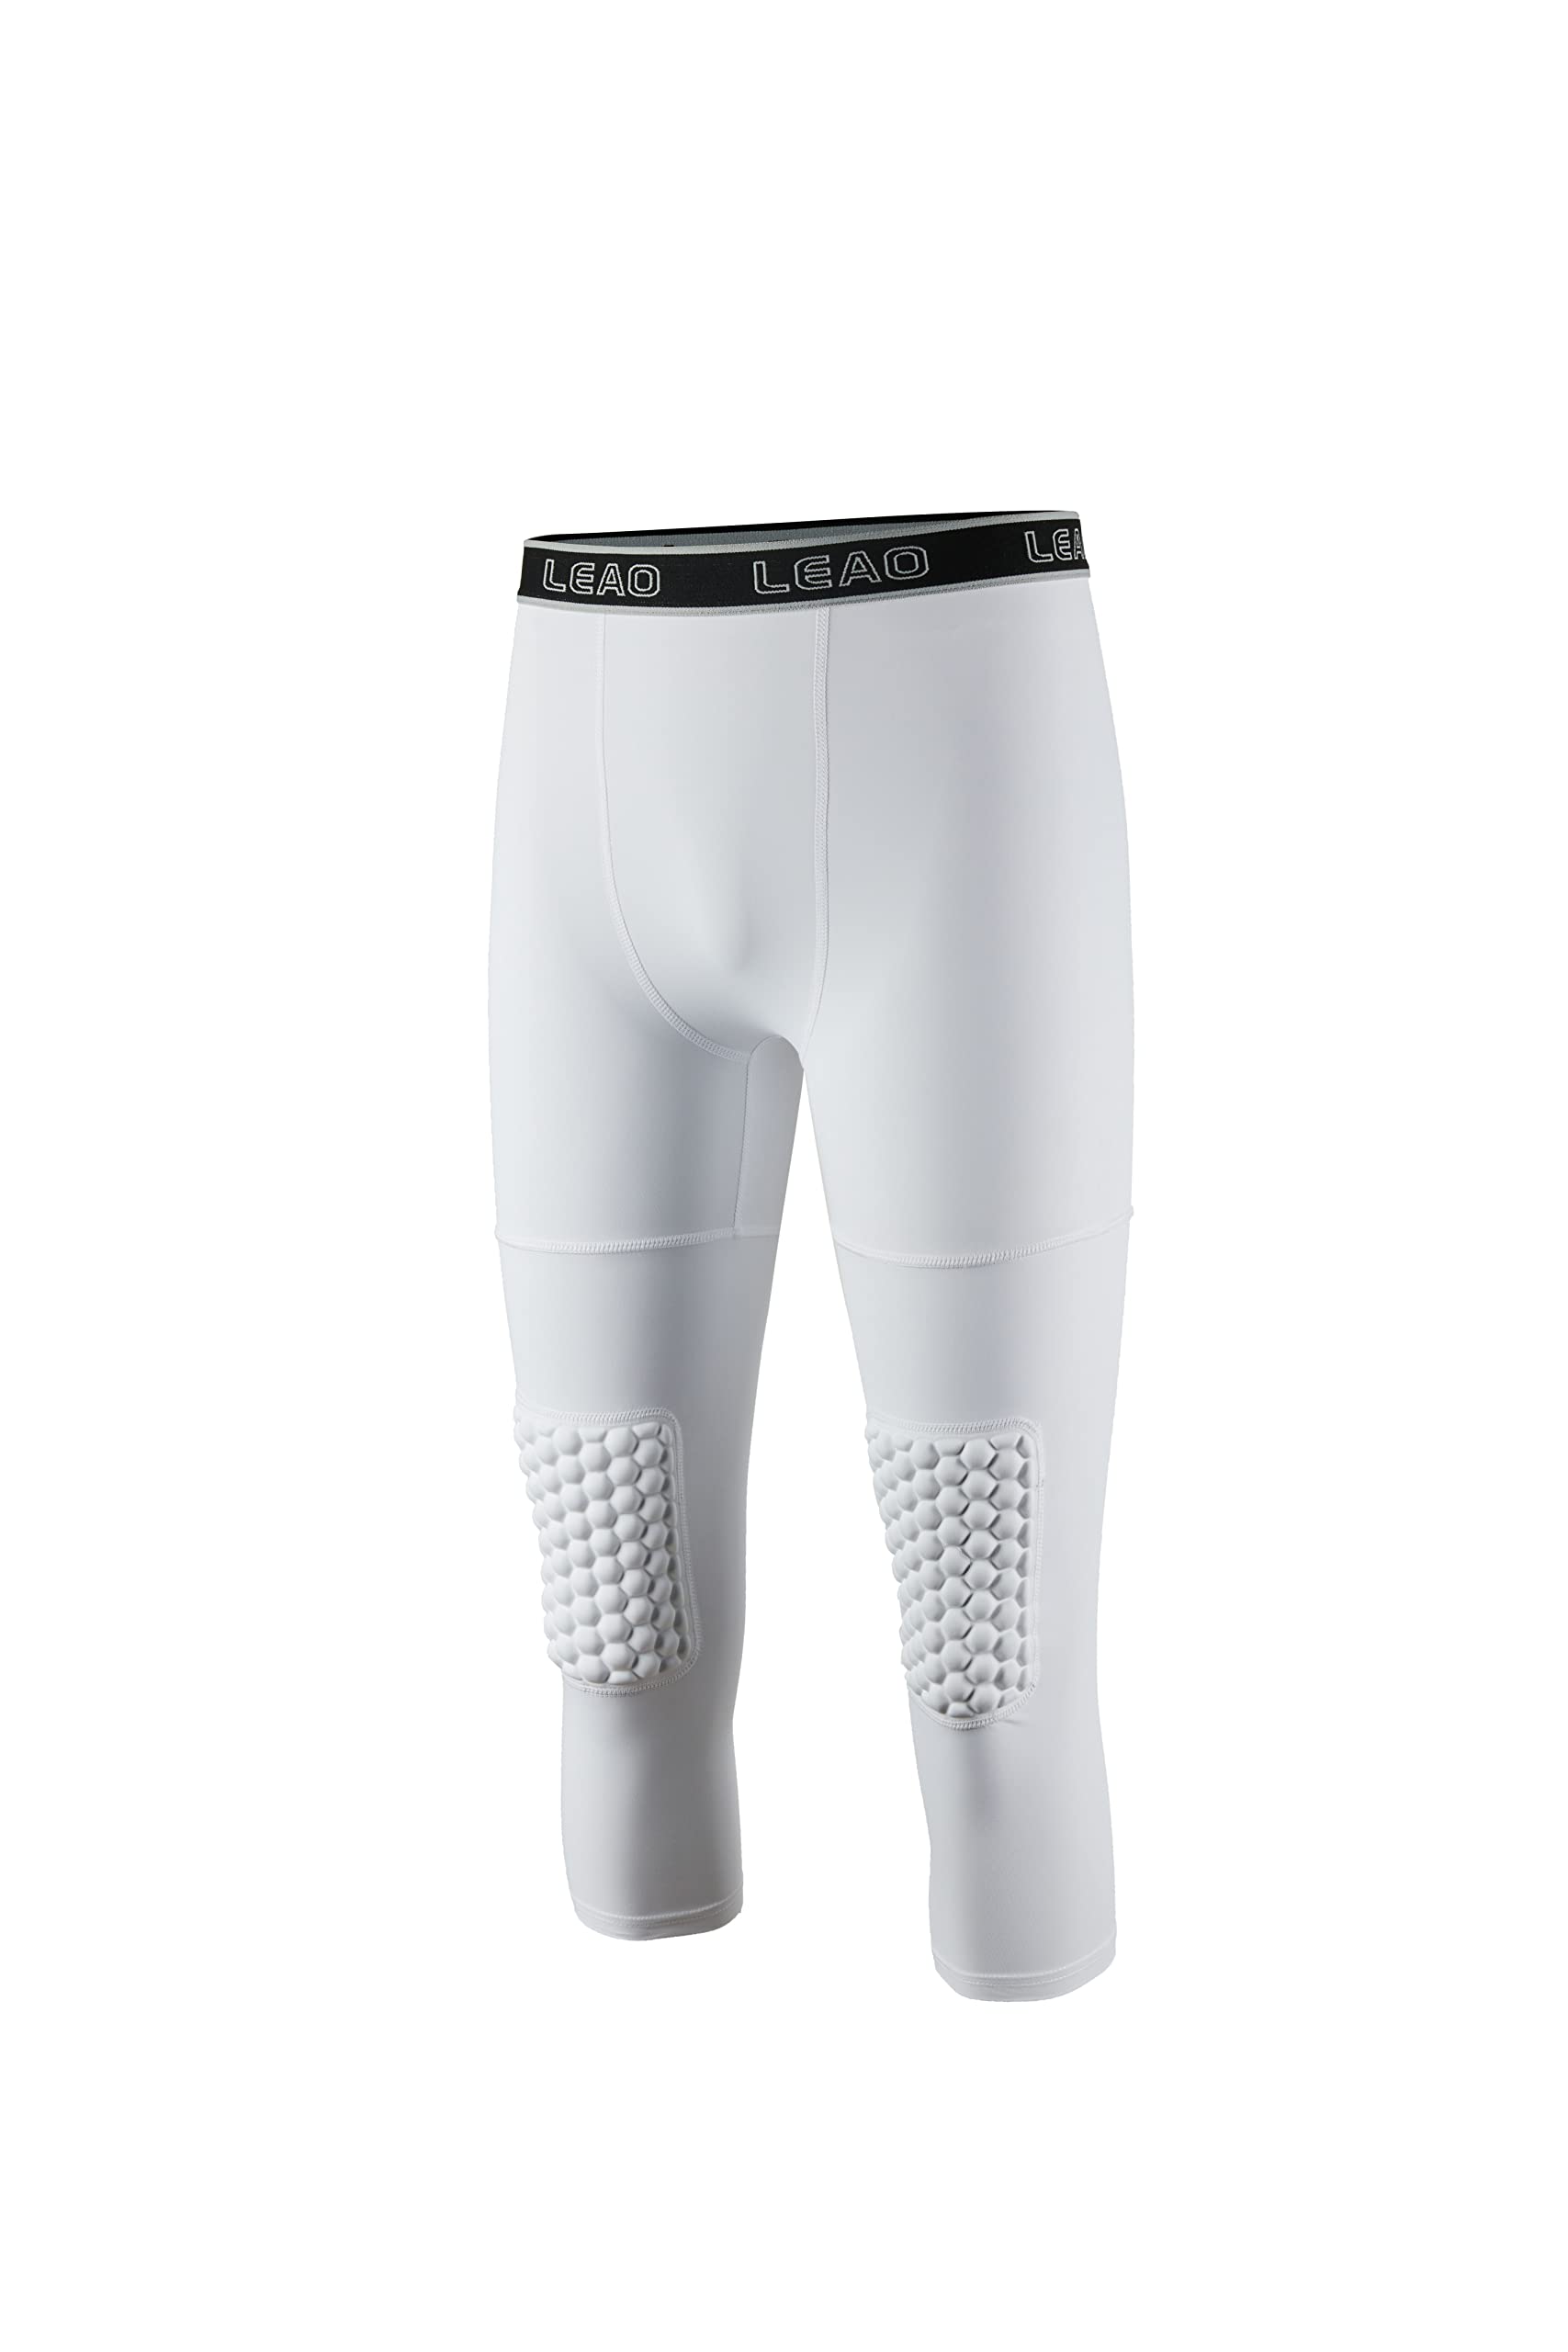 Buy Youth Boys 3/4 Compression Pants with Knee Pads Cool Dry